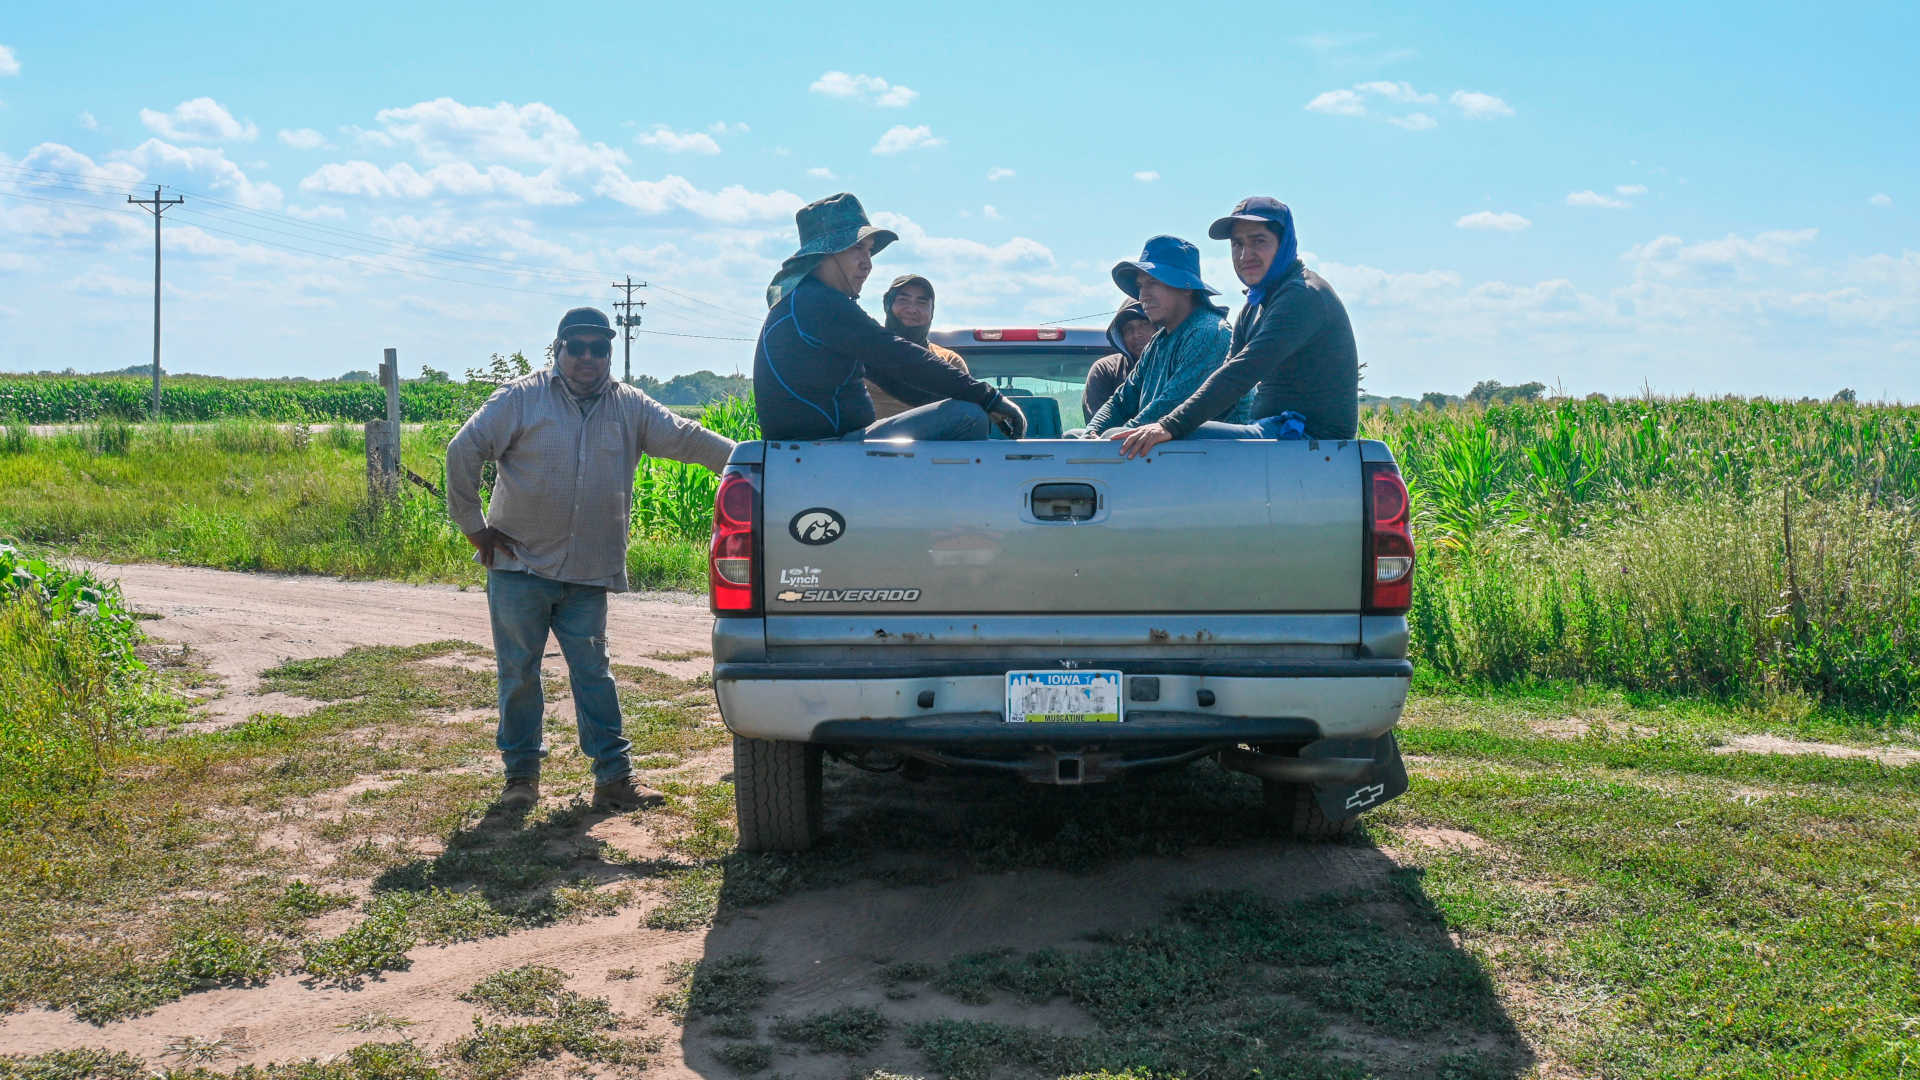 Juan Peña (seated at left) takes a break with other farmworkers in a field in southeastern Iowa on July 20, 2023. Their crew leader (standing) said summers have gotten hotter over the years.